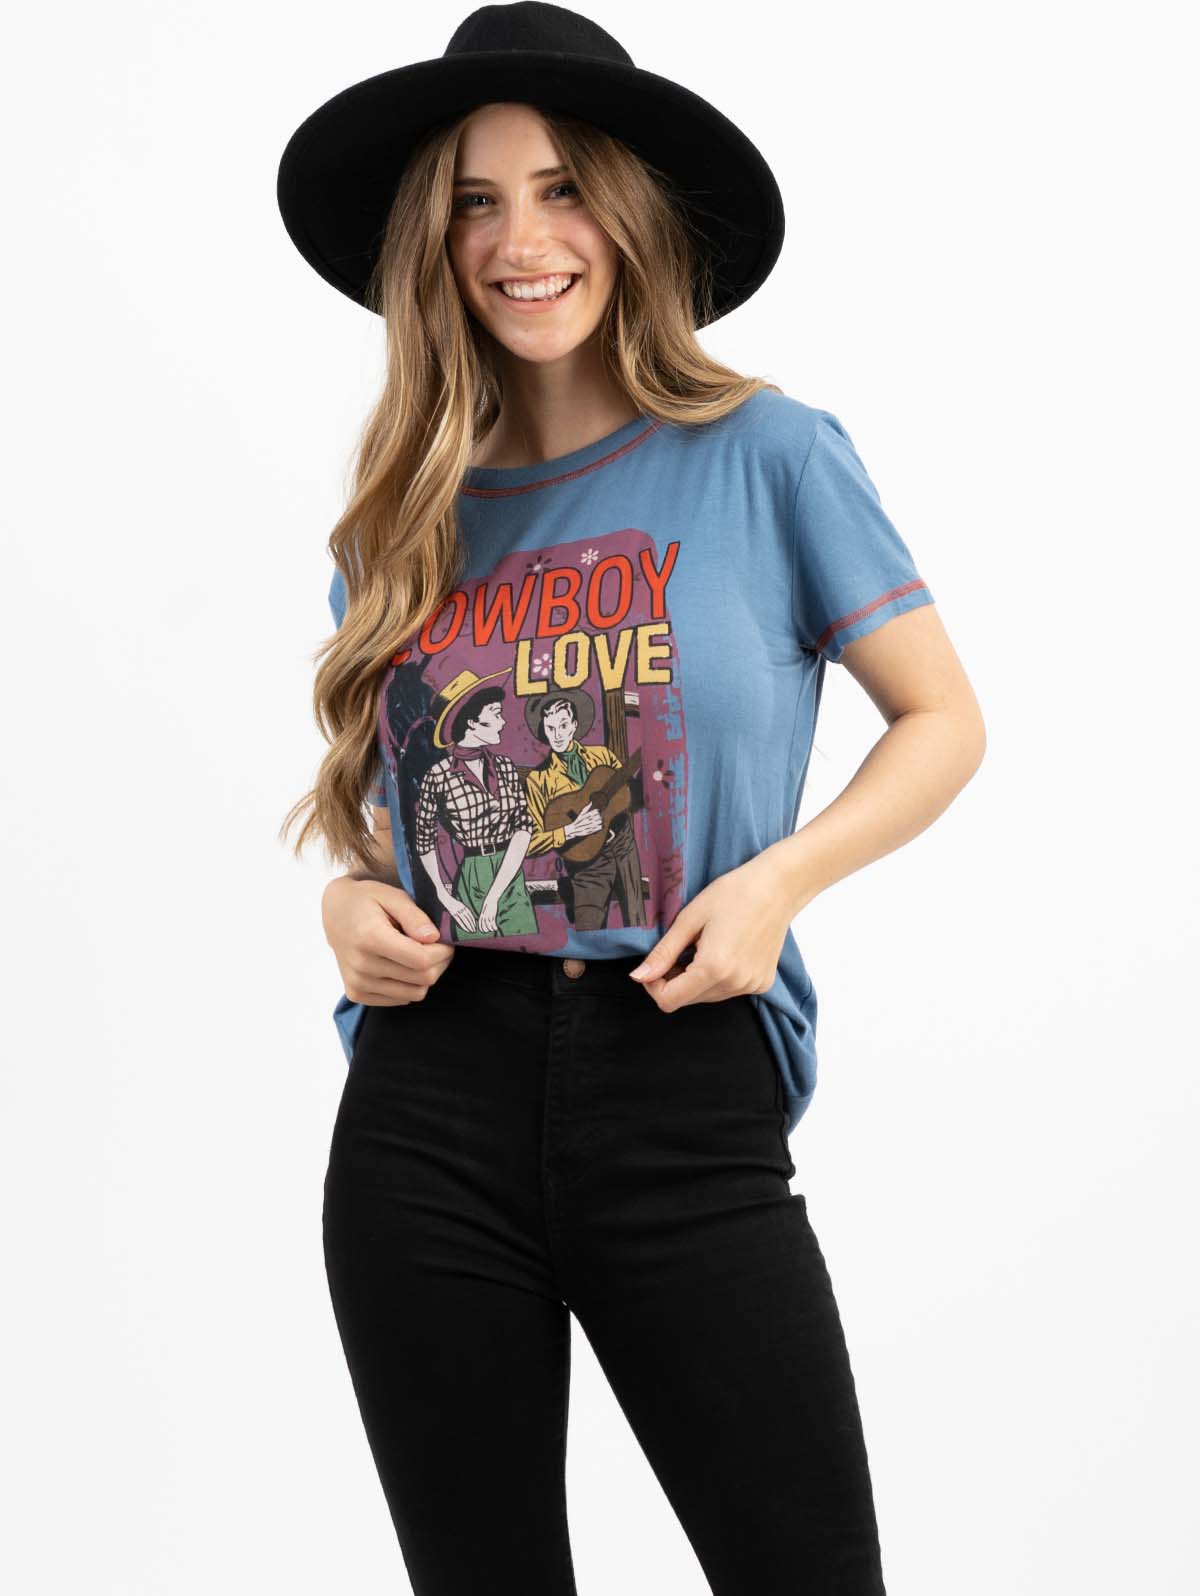 Women's Mineral Wash Contrast Stitched CowBoy Love Graphic Short Sleeve Tee